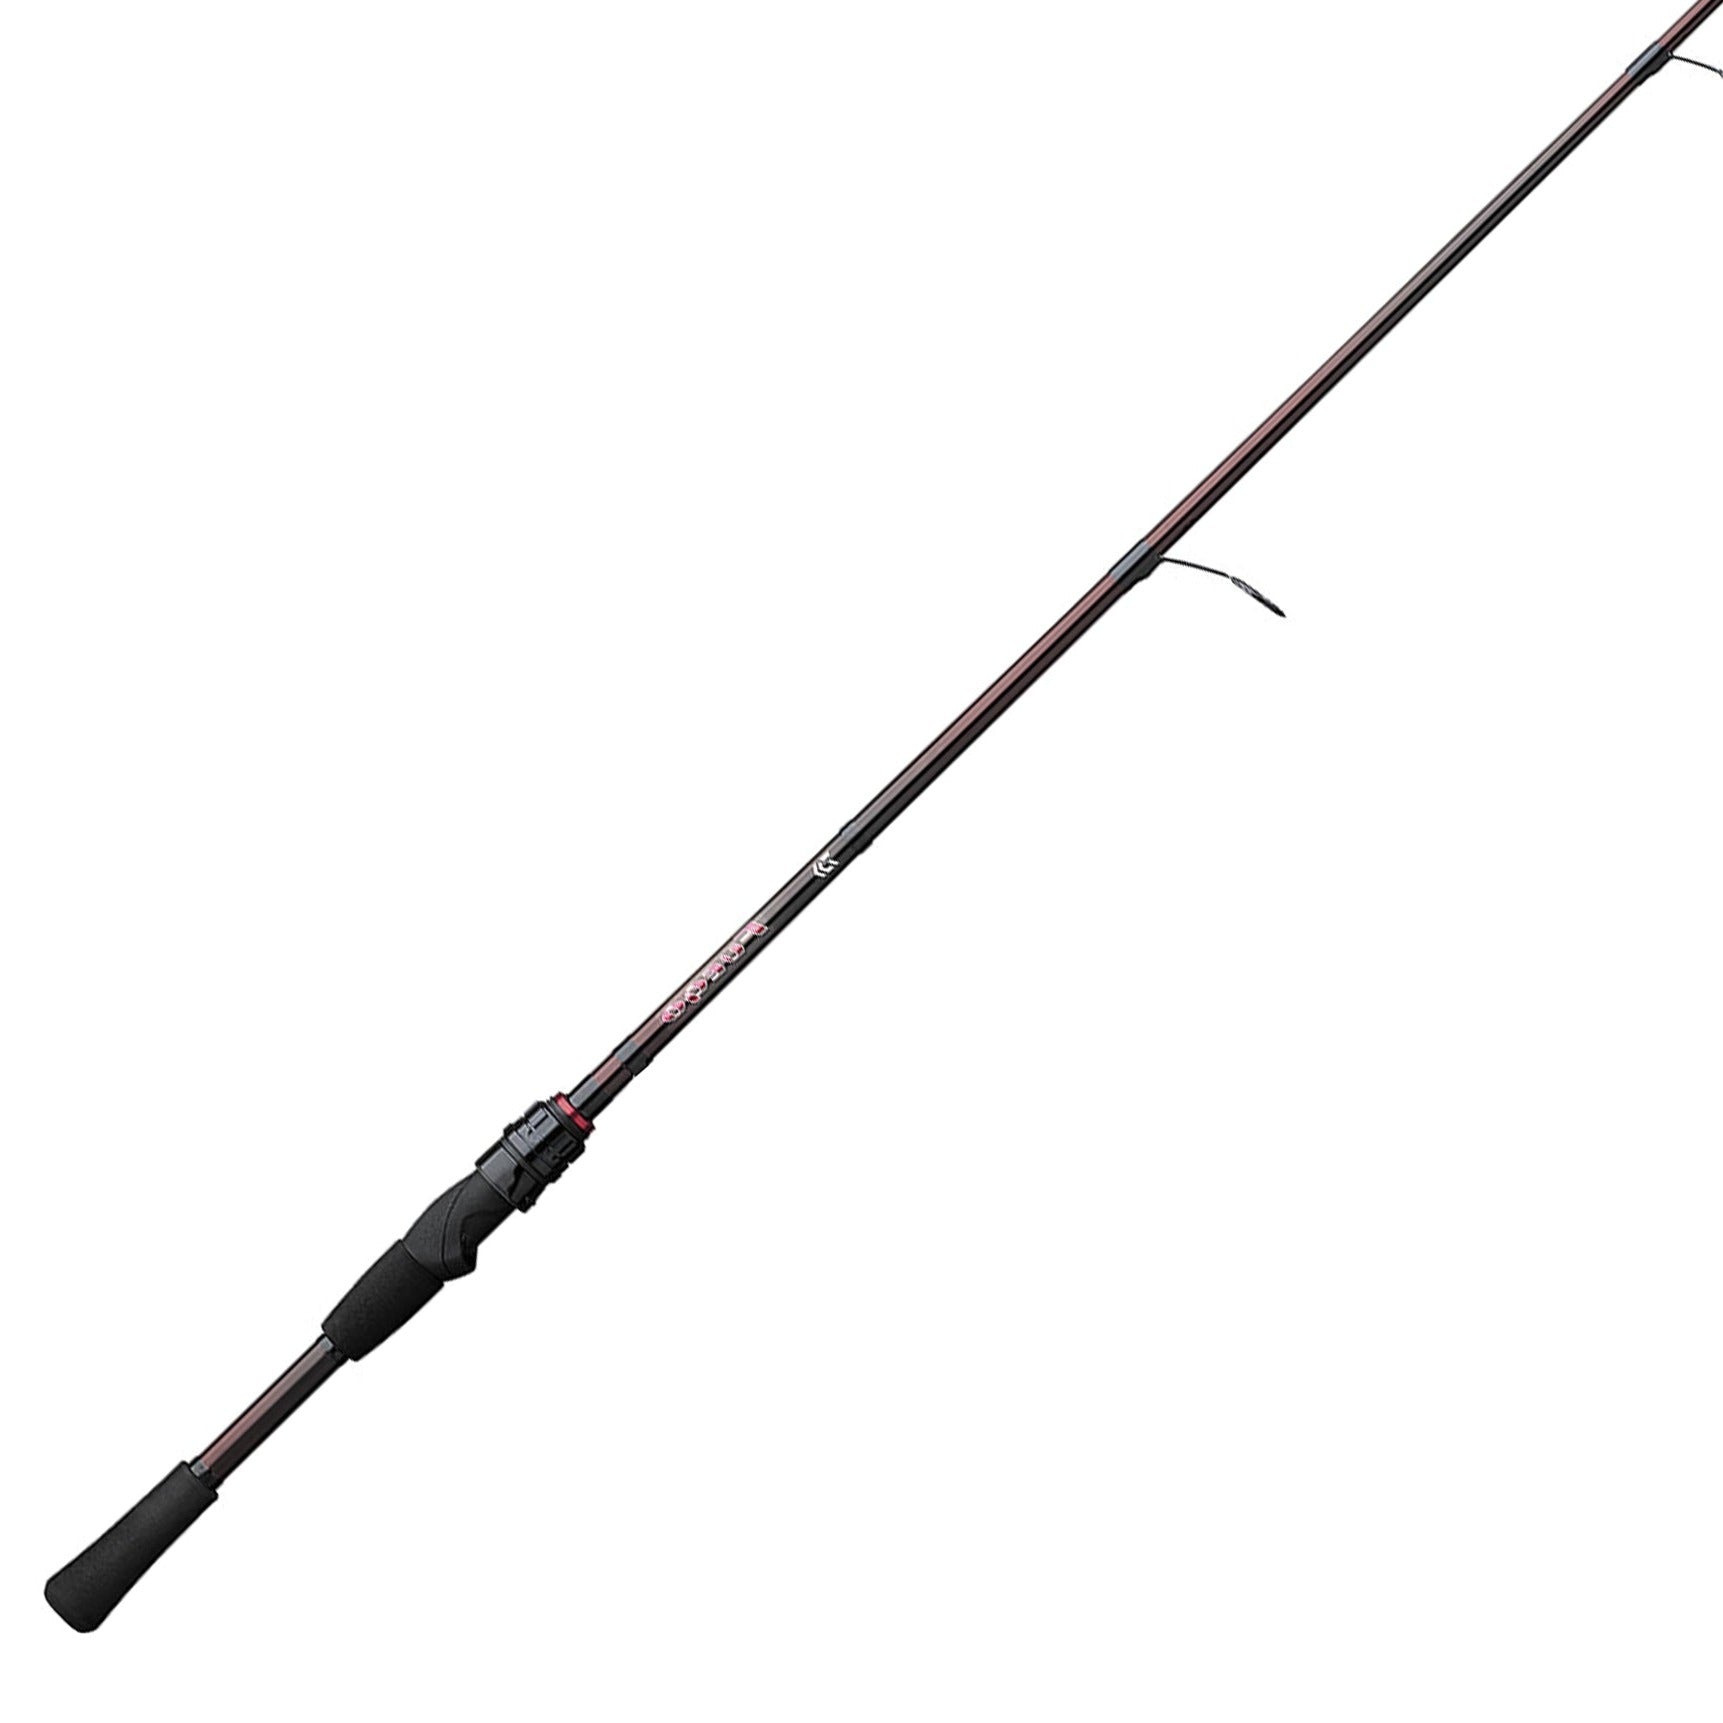 Panther Crossfire Plus Light Weight Fiber Glass Spinning Fishing